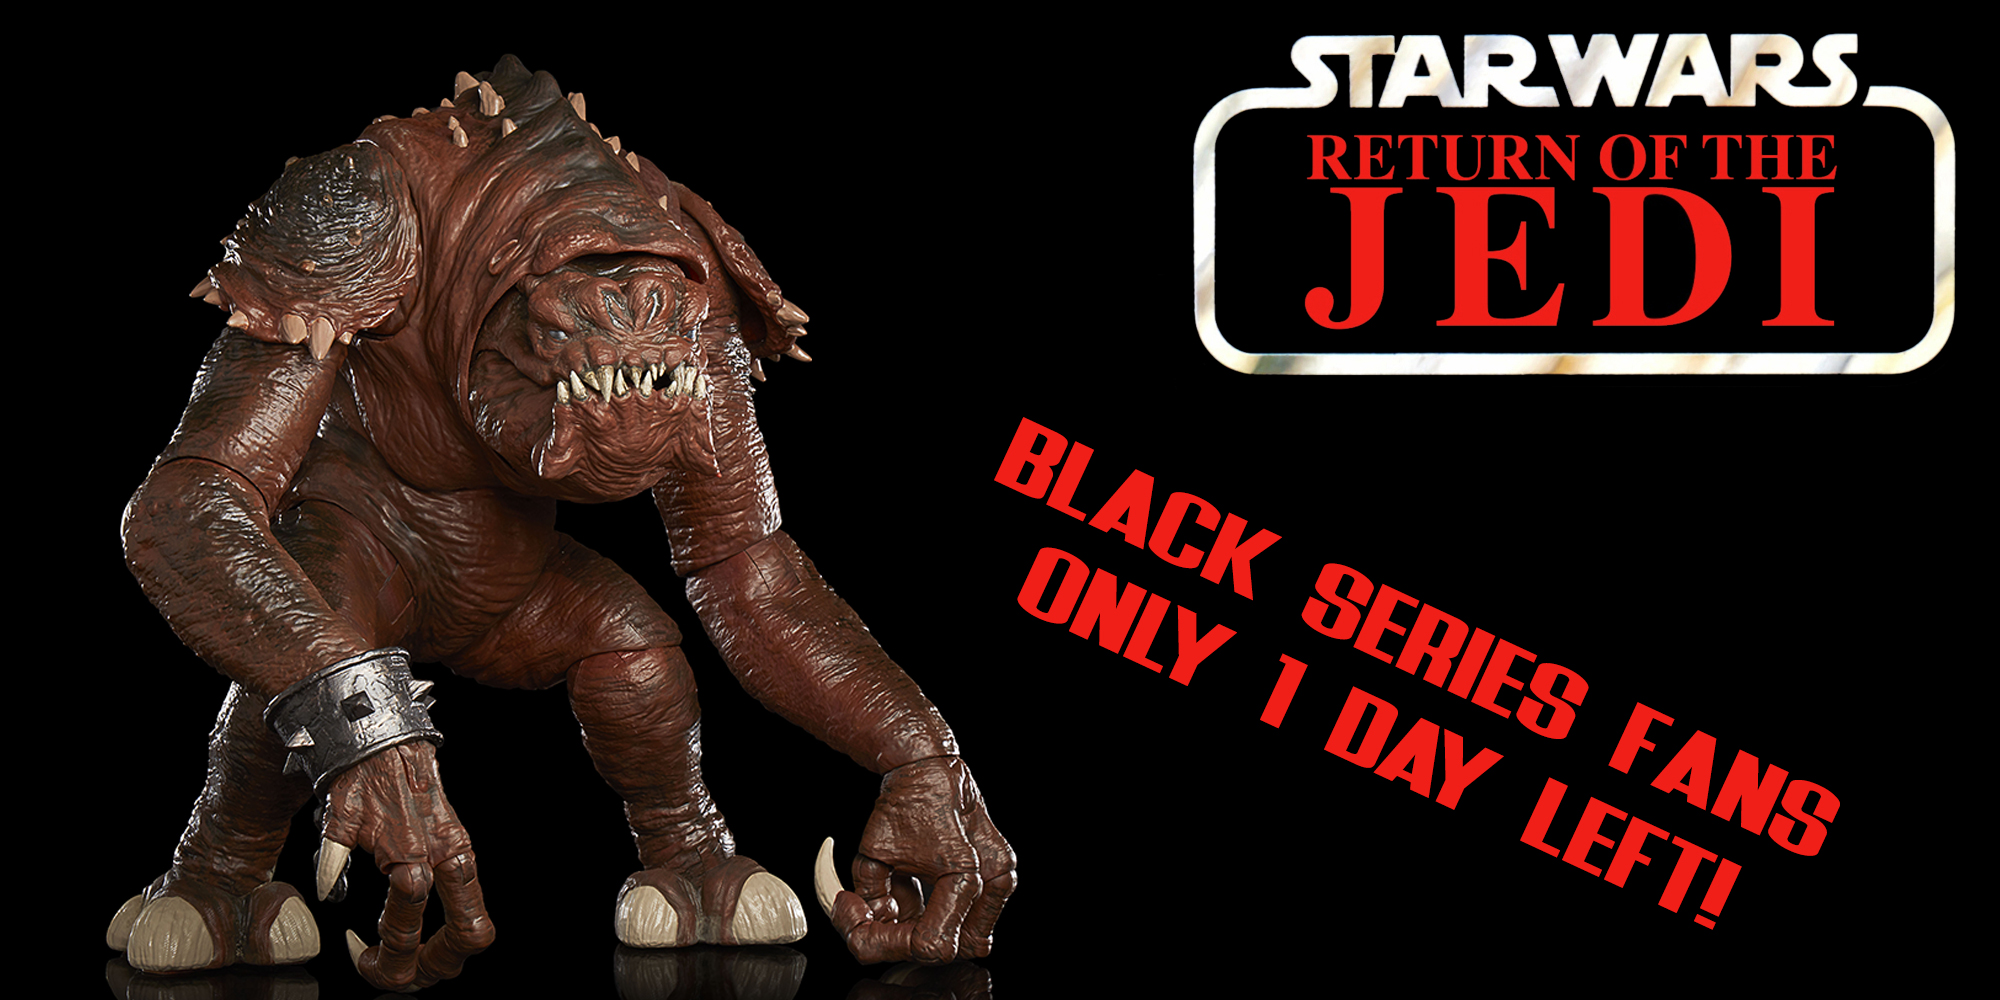 The Black Series Rancor! Only 1 Day Left!